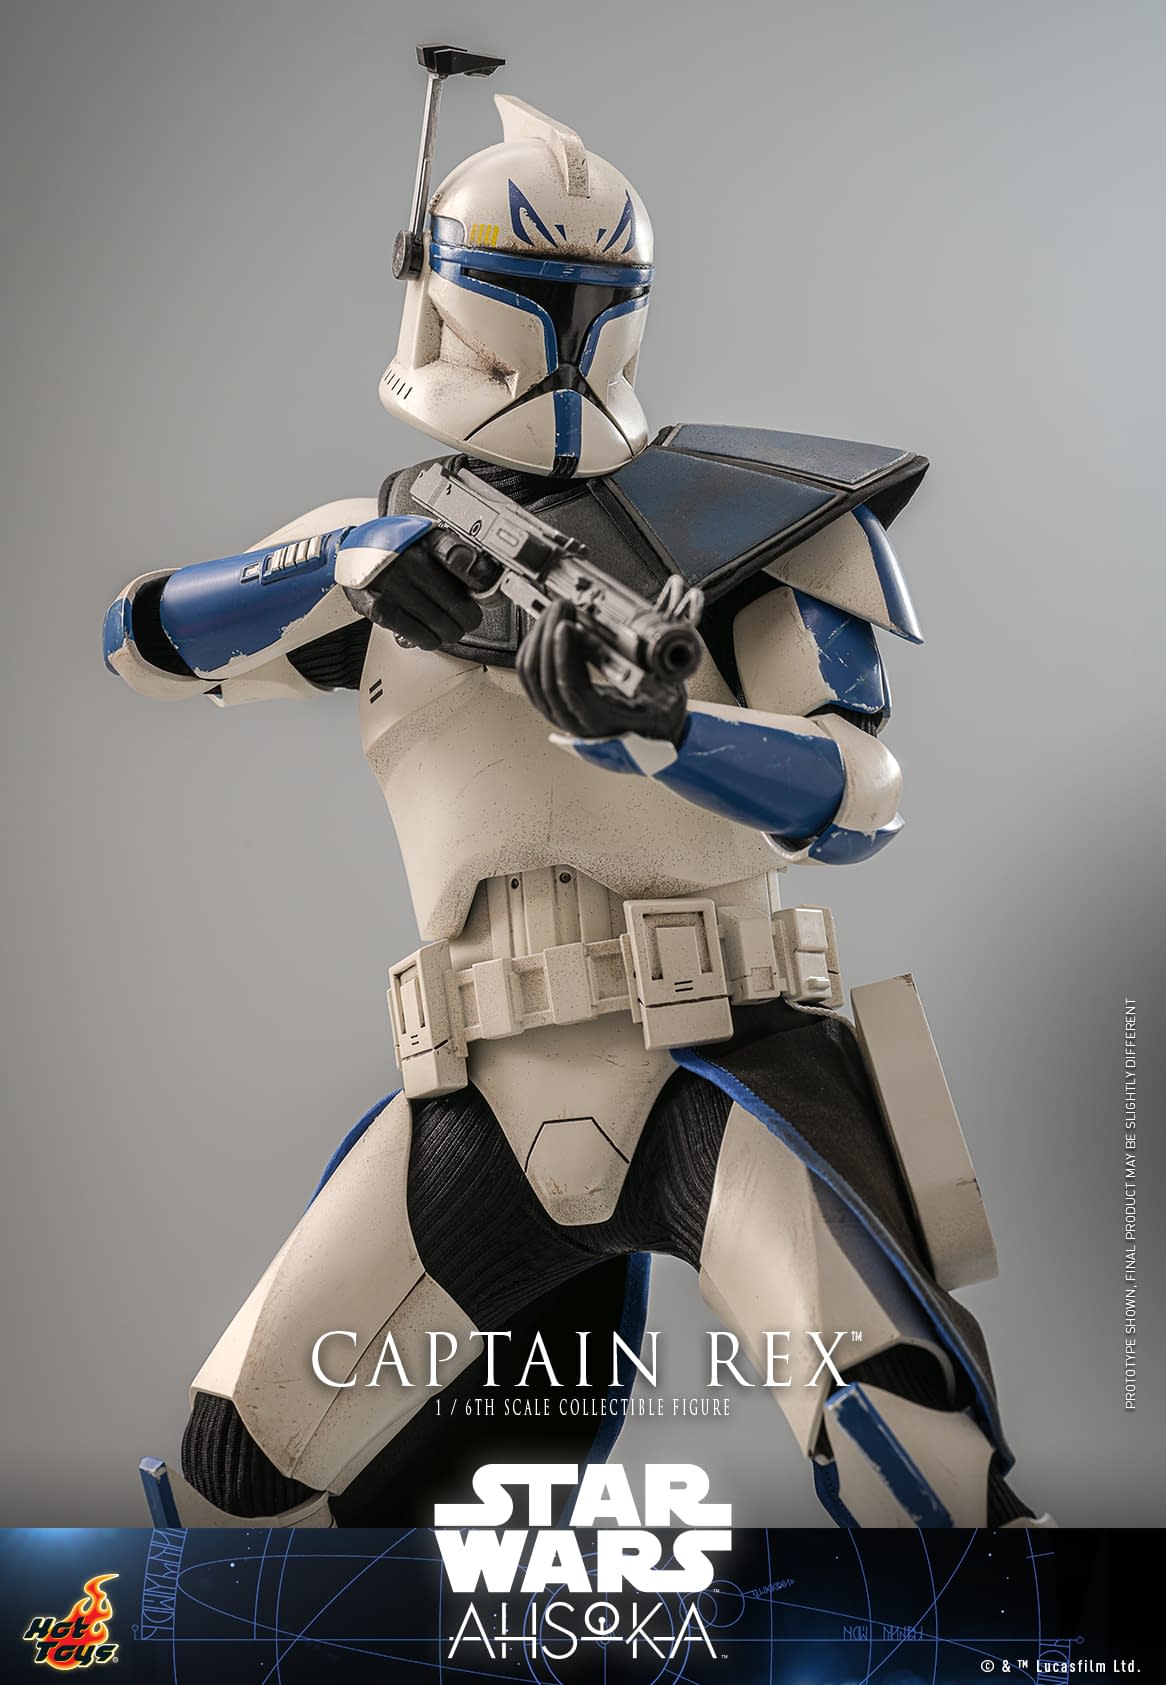 Captain Rex Returns to Hot Toys with New Star Wars 1/6 Scale Release7